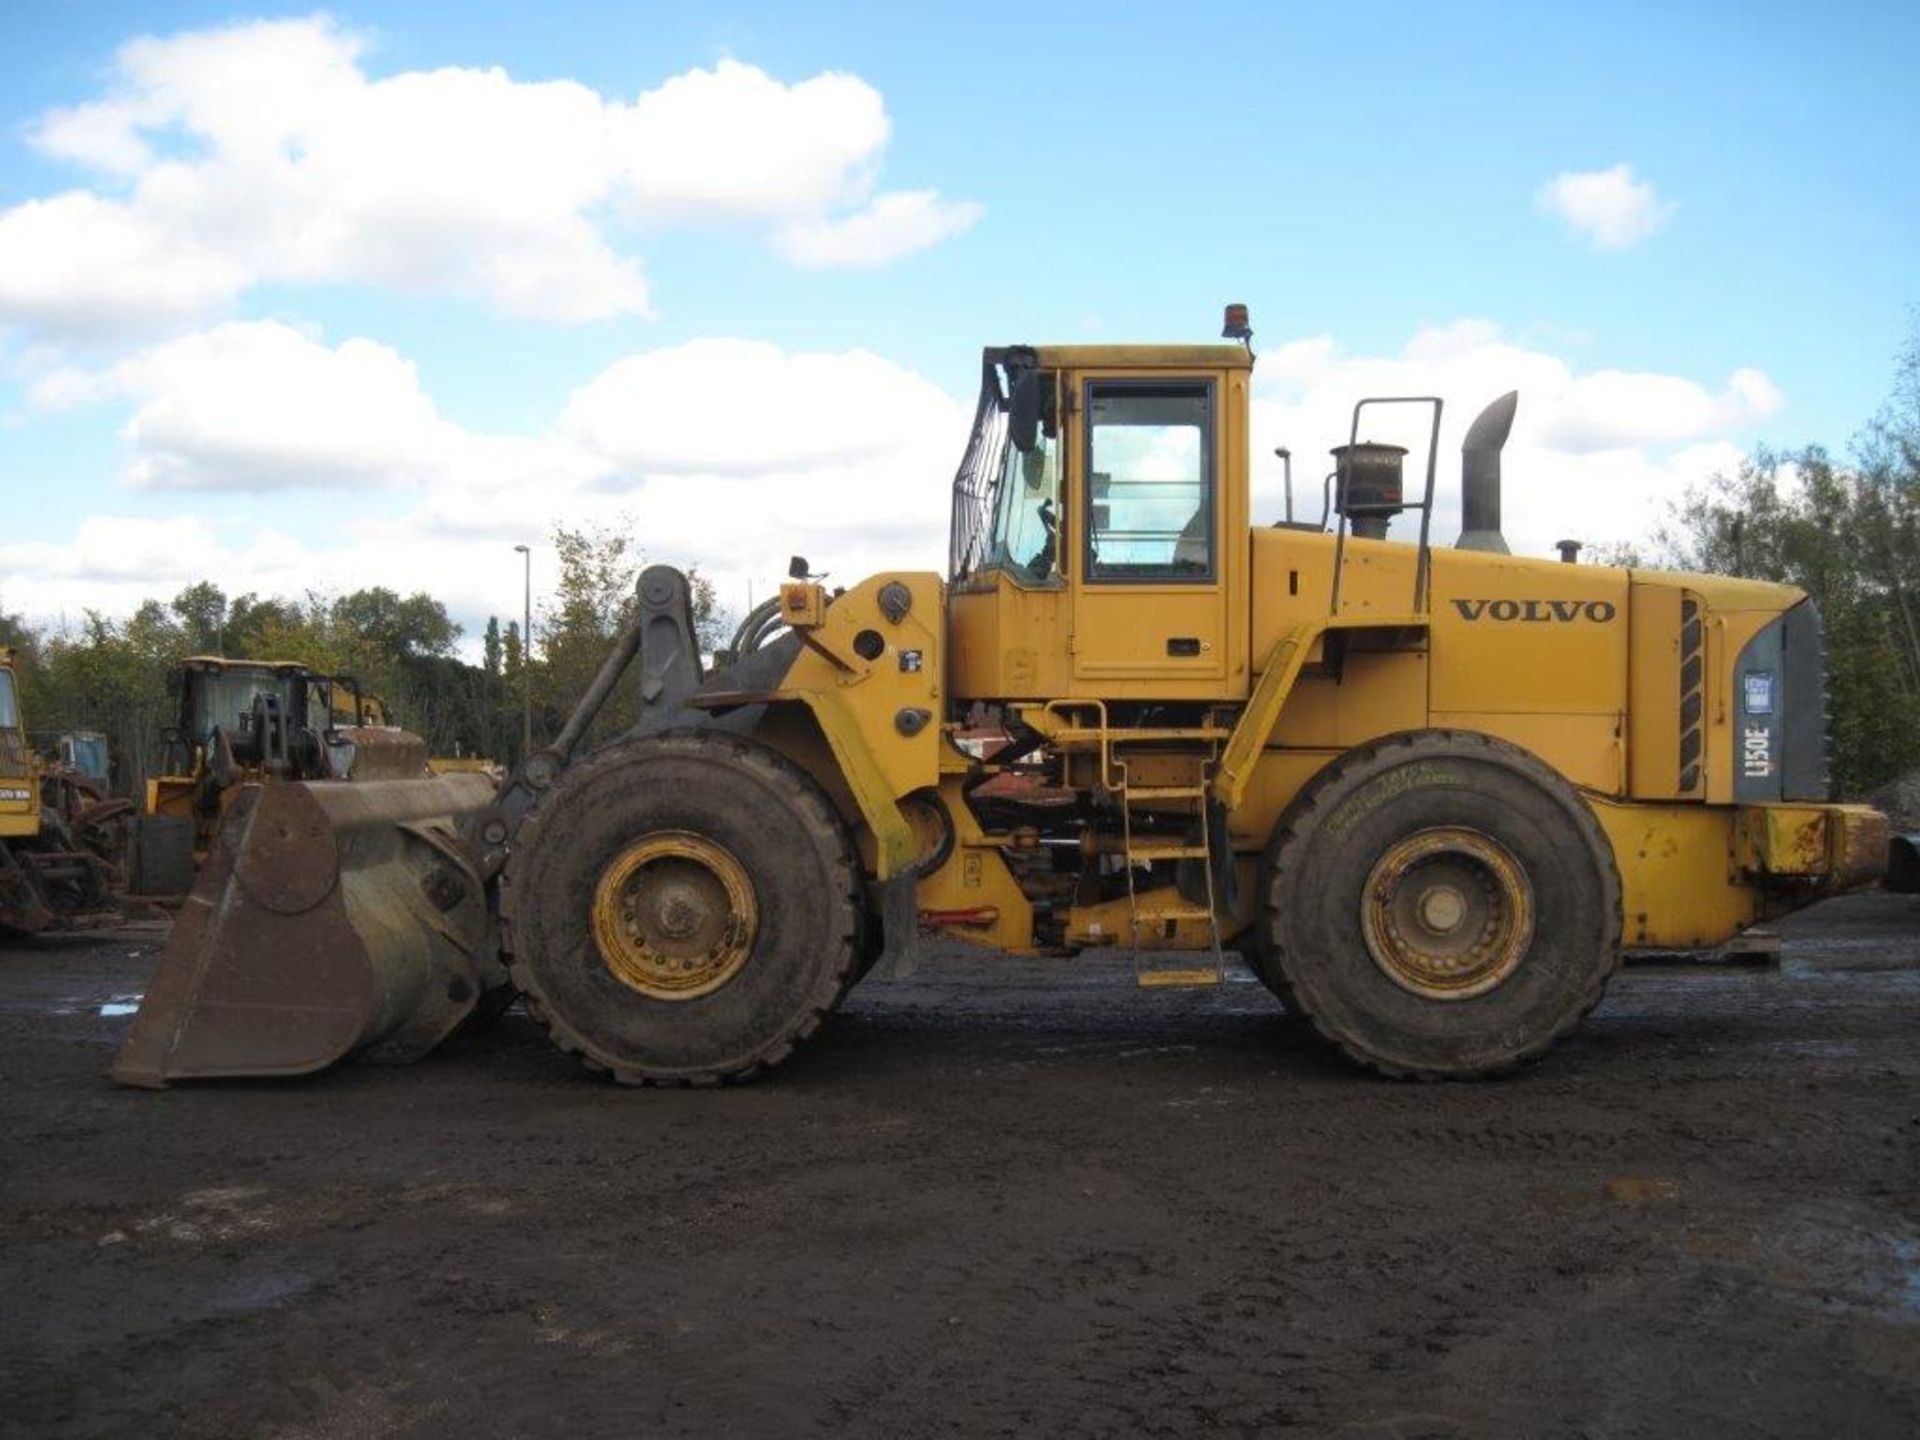 Volvo L150e Loading Shovel 2005, very good condition, original paint and well maintained - Image 2 of 3